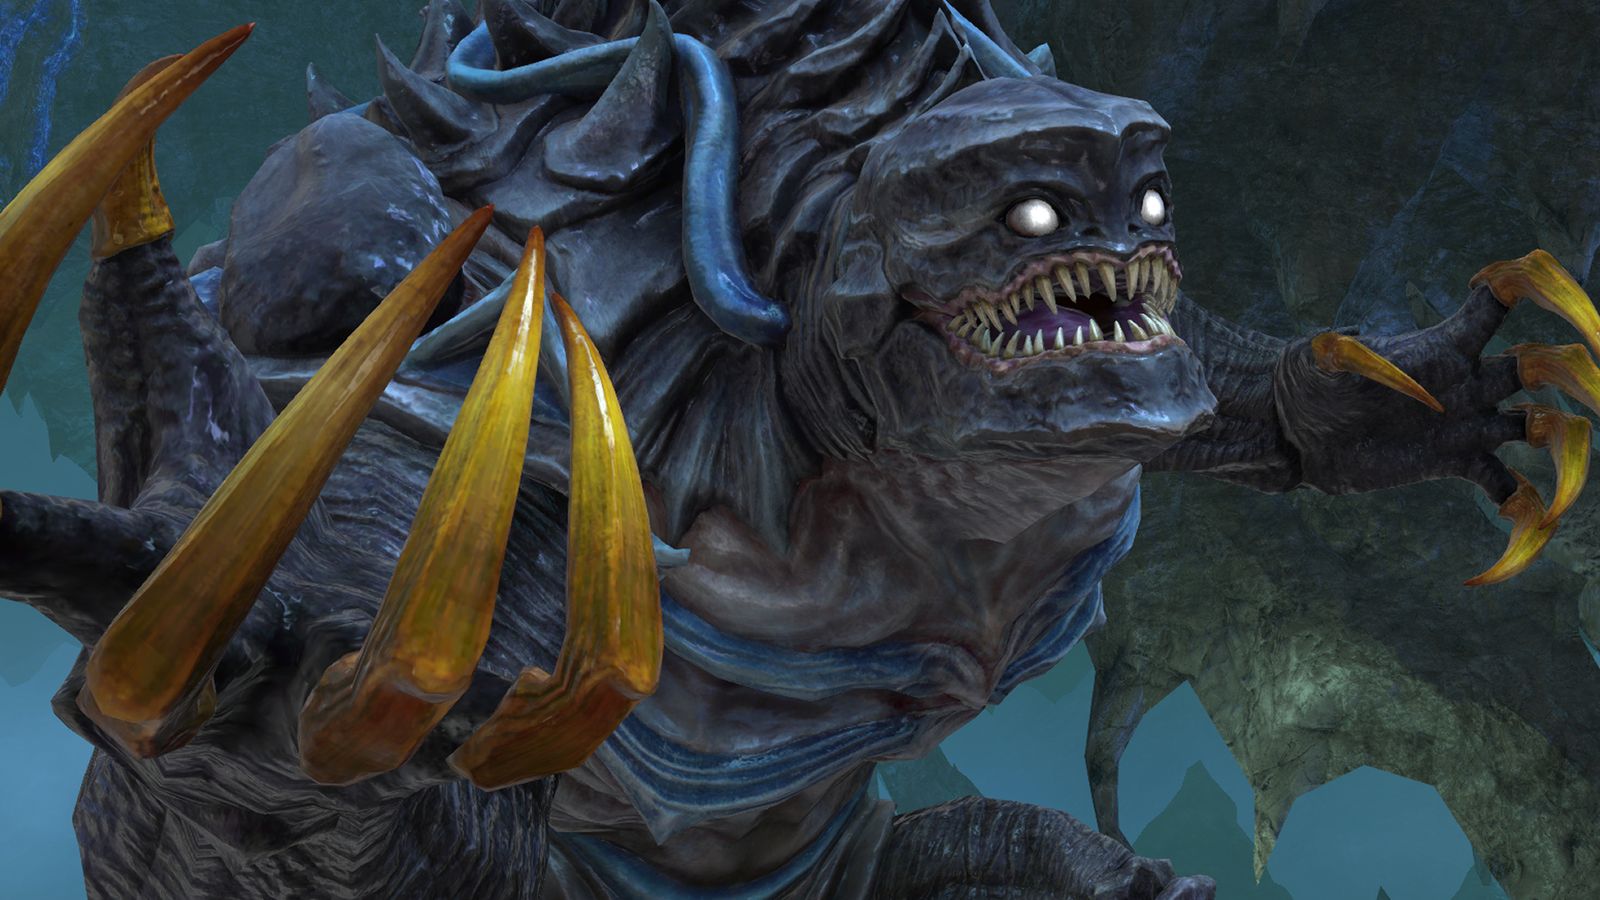 An image of a monsterous boss from Final Fantasy XIV's Expert Roulette. He is a bestial, fish-like humanoid with sharp claws.